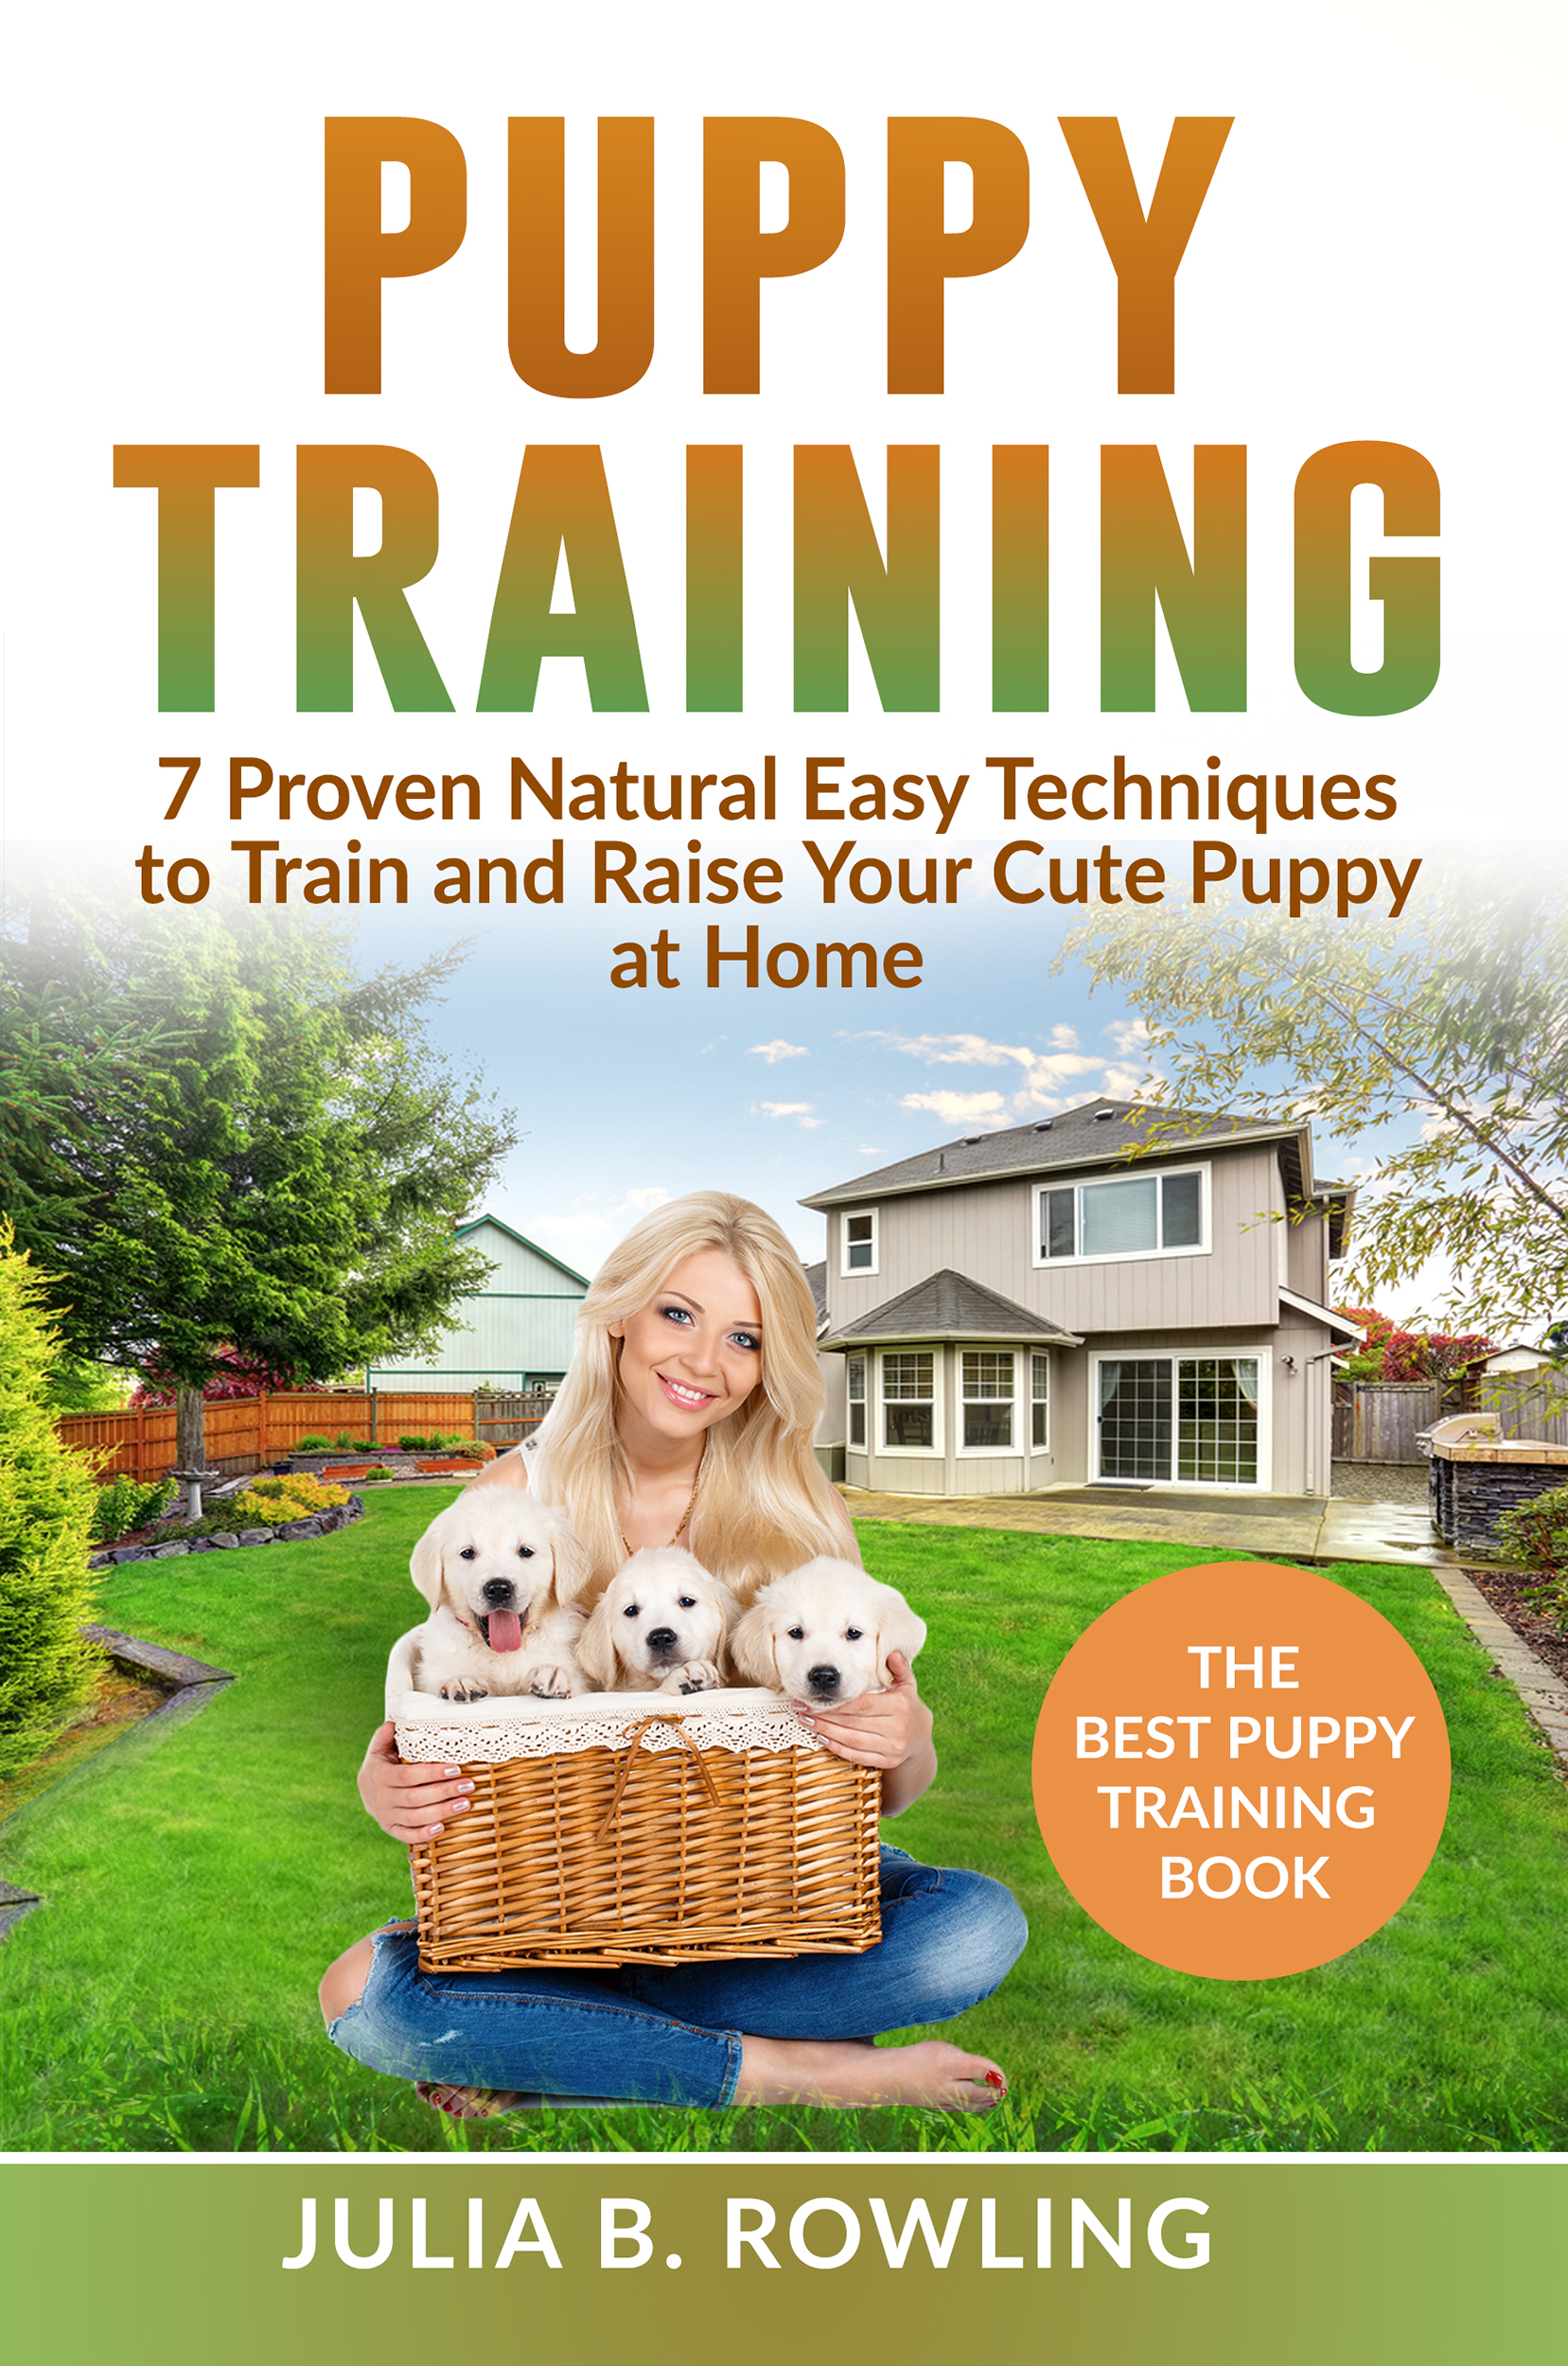 FREE: Puppy Training: 7 Proven Natural Easy Techniques to Train and Raise Your Cute Puppy at Home: Well Behaved Dog Training, Obey Your Orders, understand your Signals. Raise Your New Best Friend Playfully by Julia B. Rowling